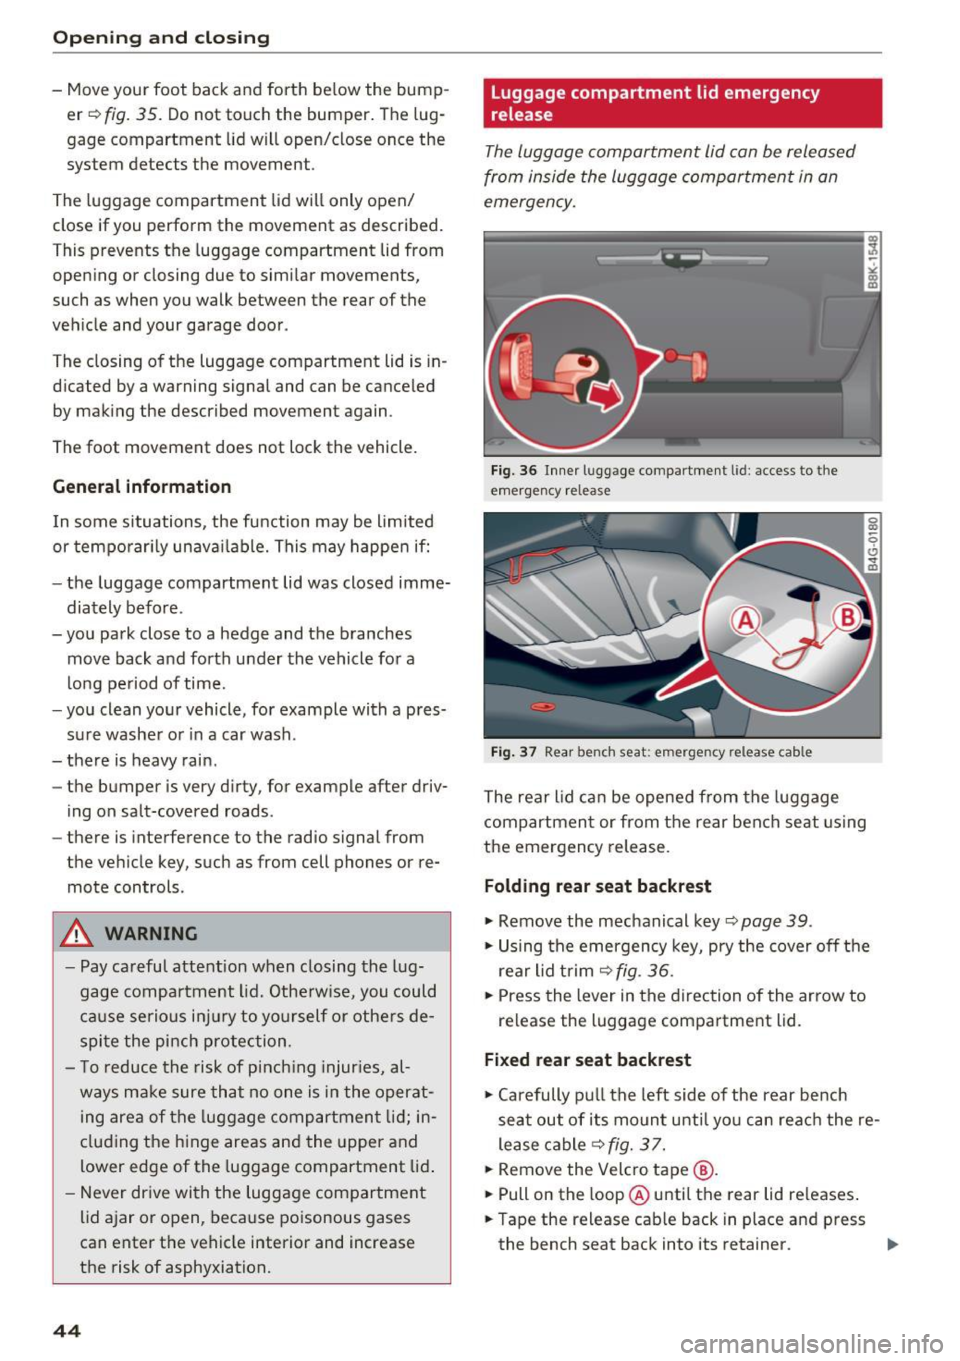 AUDI A4 2017 Service Manual Opening  and clo sin g 
- Move your  foot  back  and  forth  below  the  bump­
er¢ 
fig.  35. Do not  touch  the  bumper.  The  lug­
gage  compartment  lid will  open/close  once  the 
system  dete